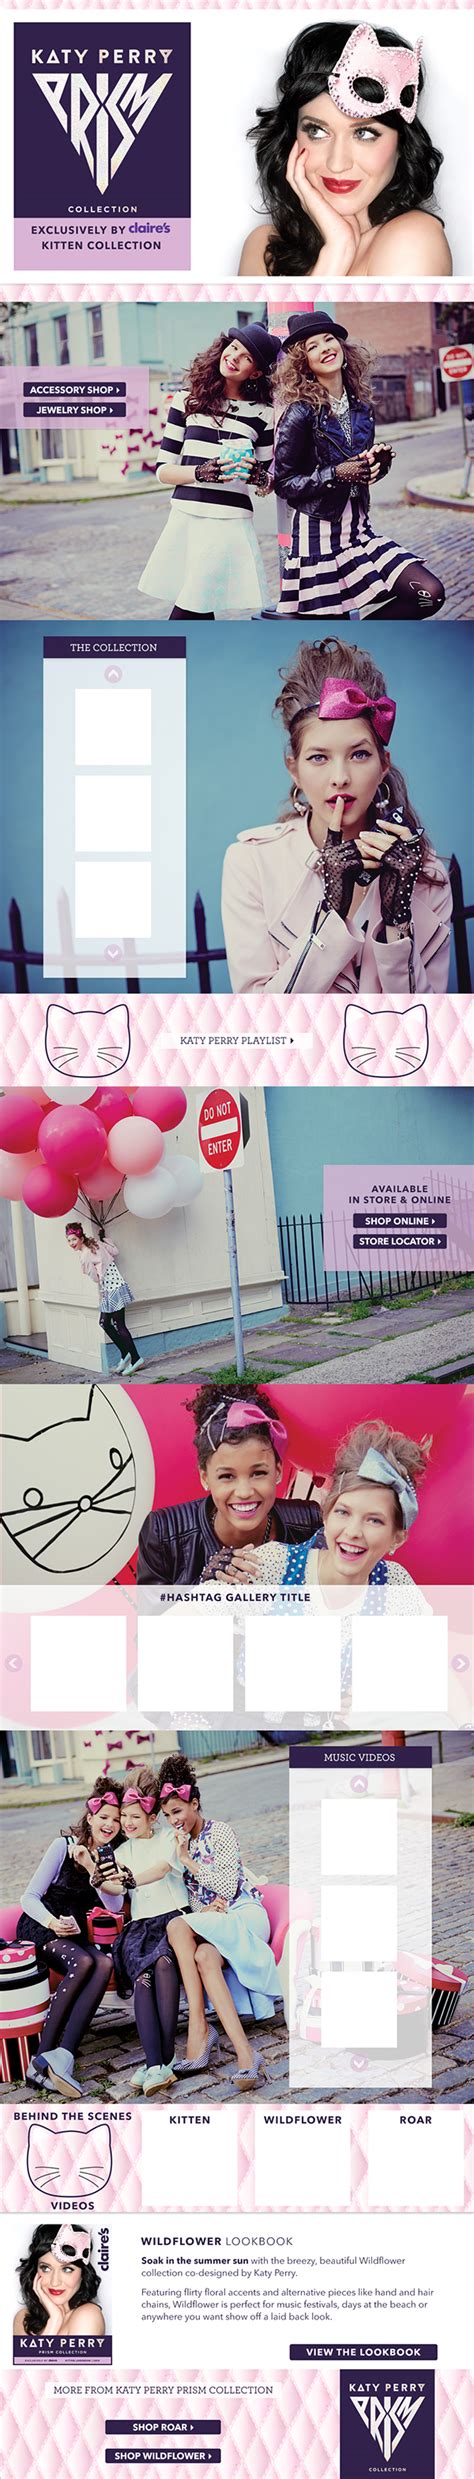 Katy Perry Kitten Collection Landing Page And Email On Behance